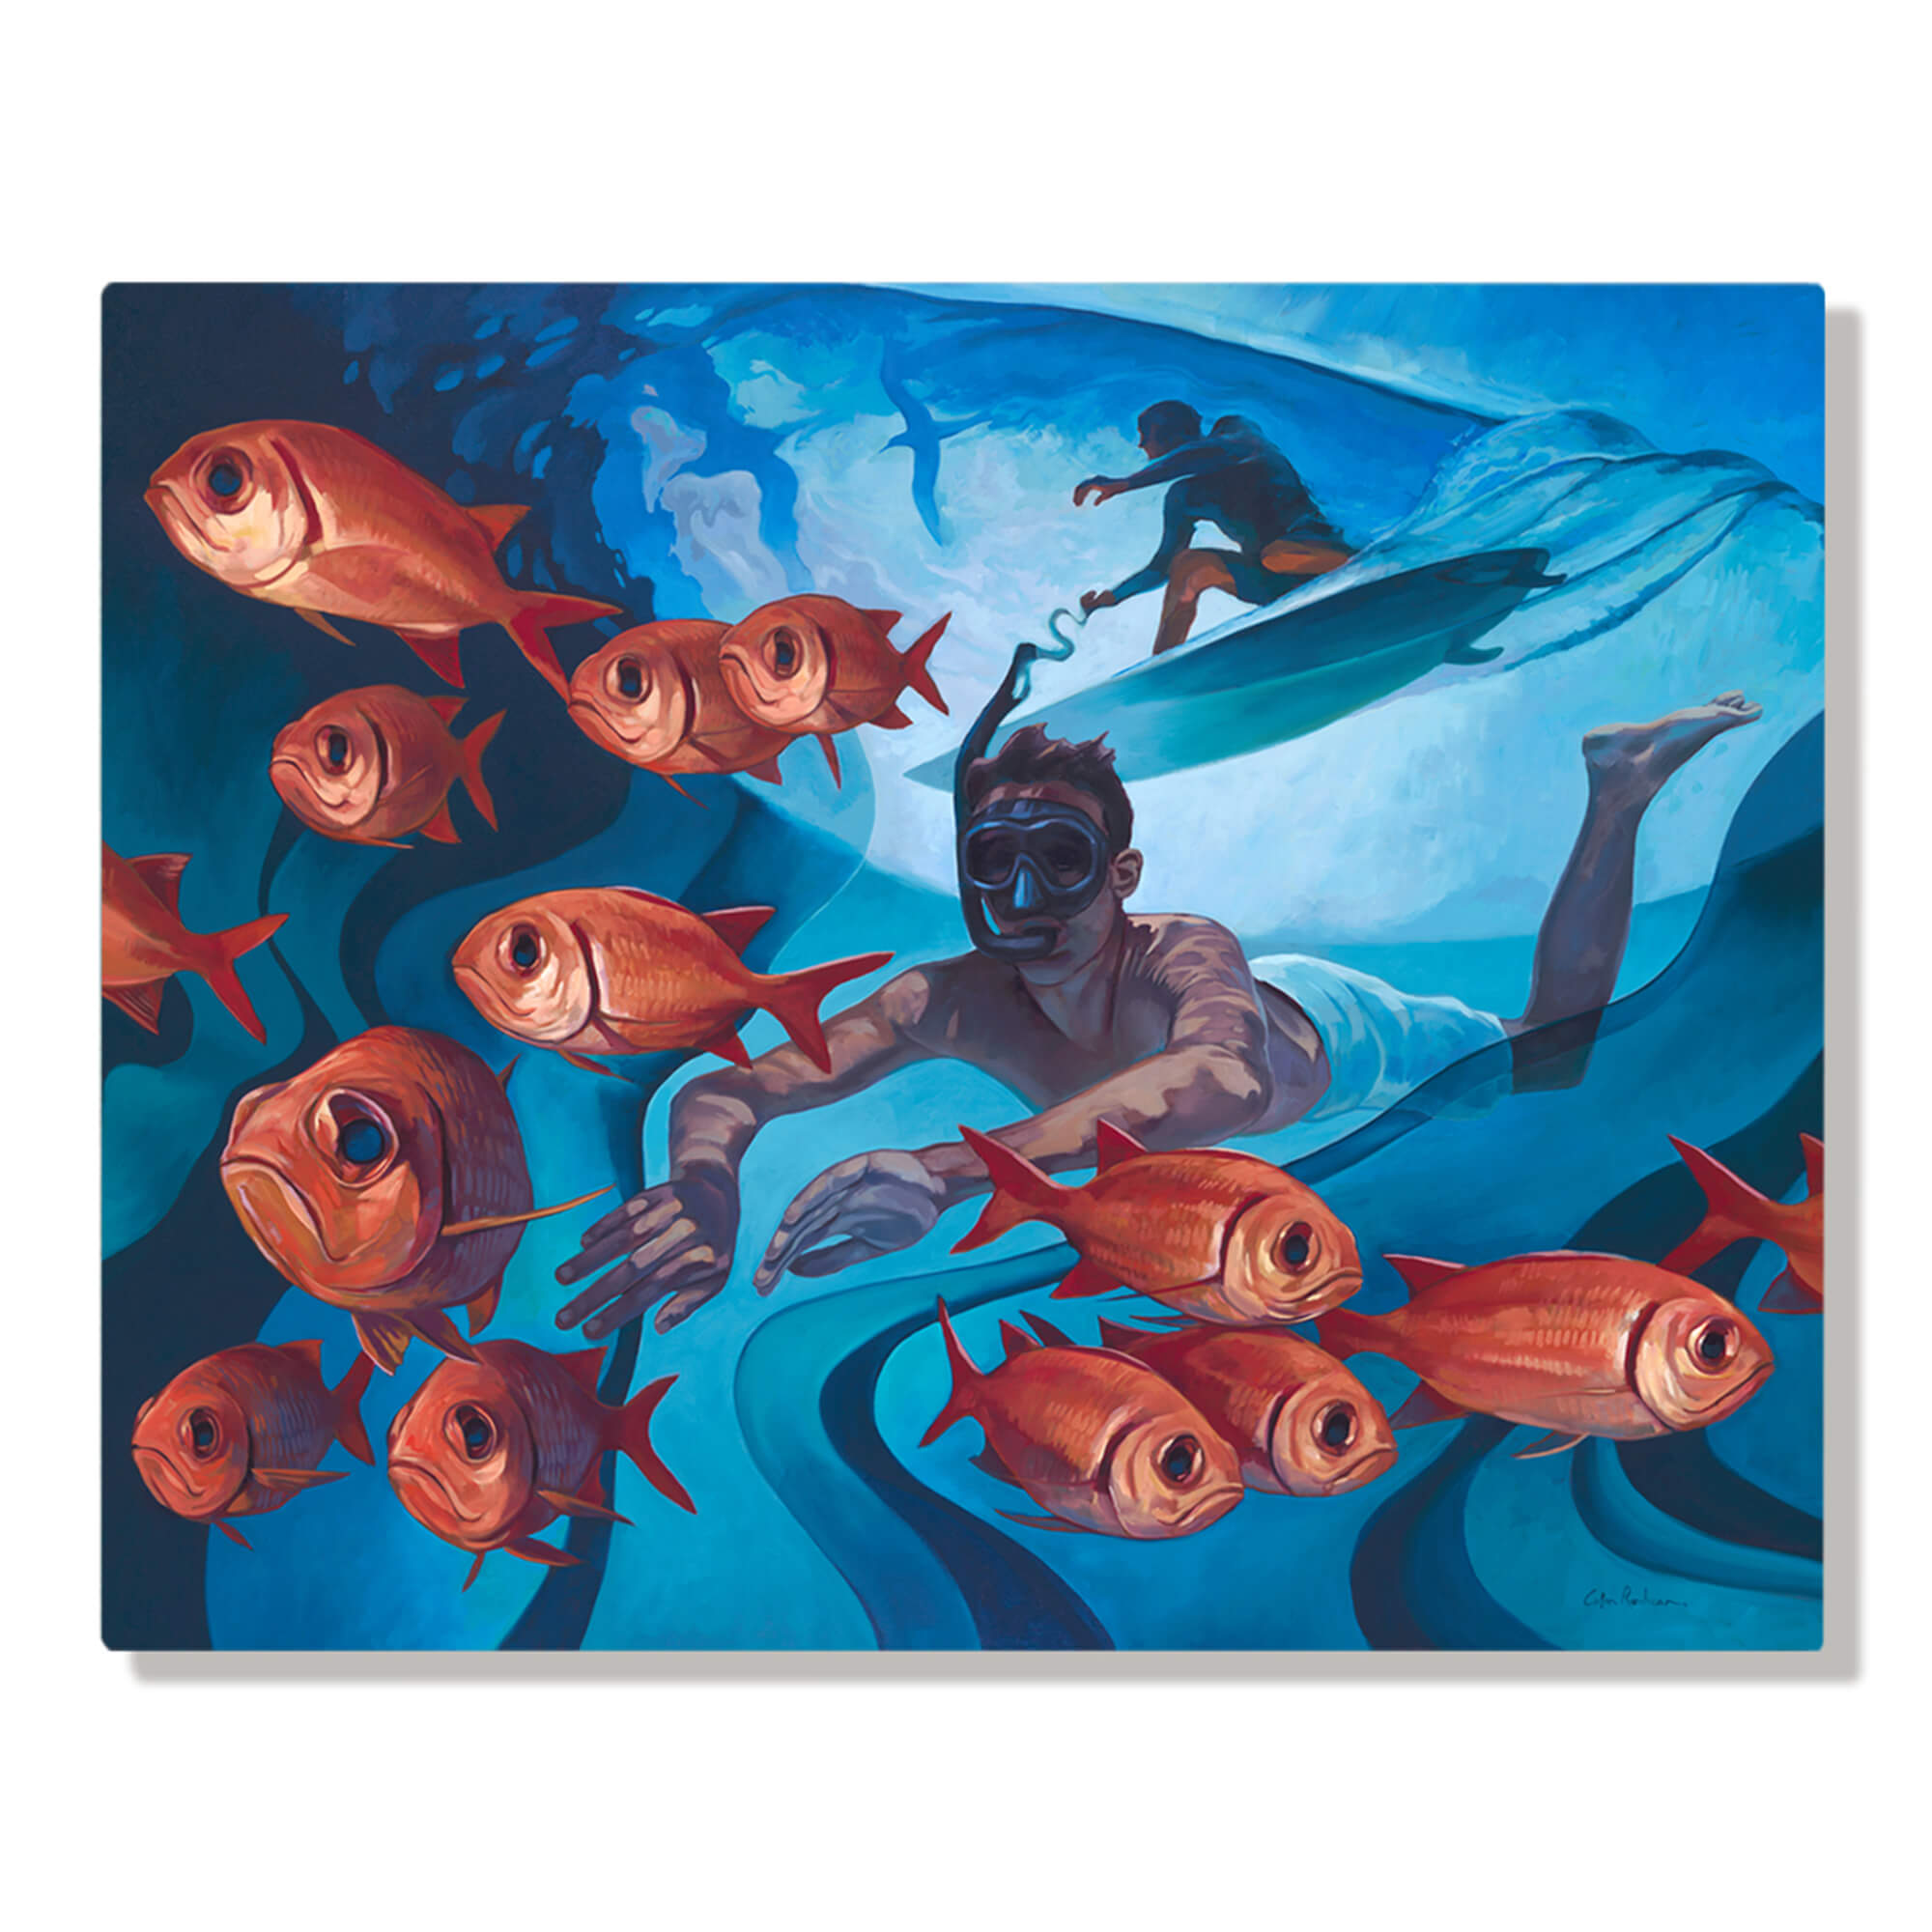 A man diving with red fish by Hawaii artist Colin Redican